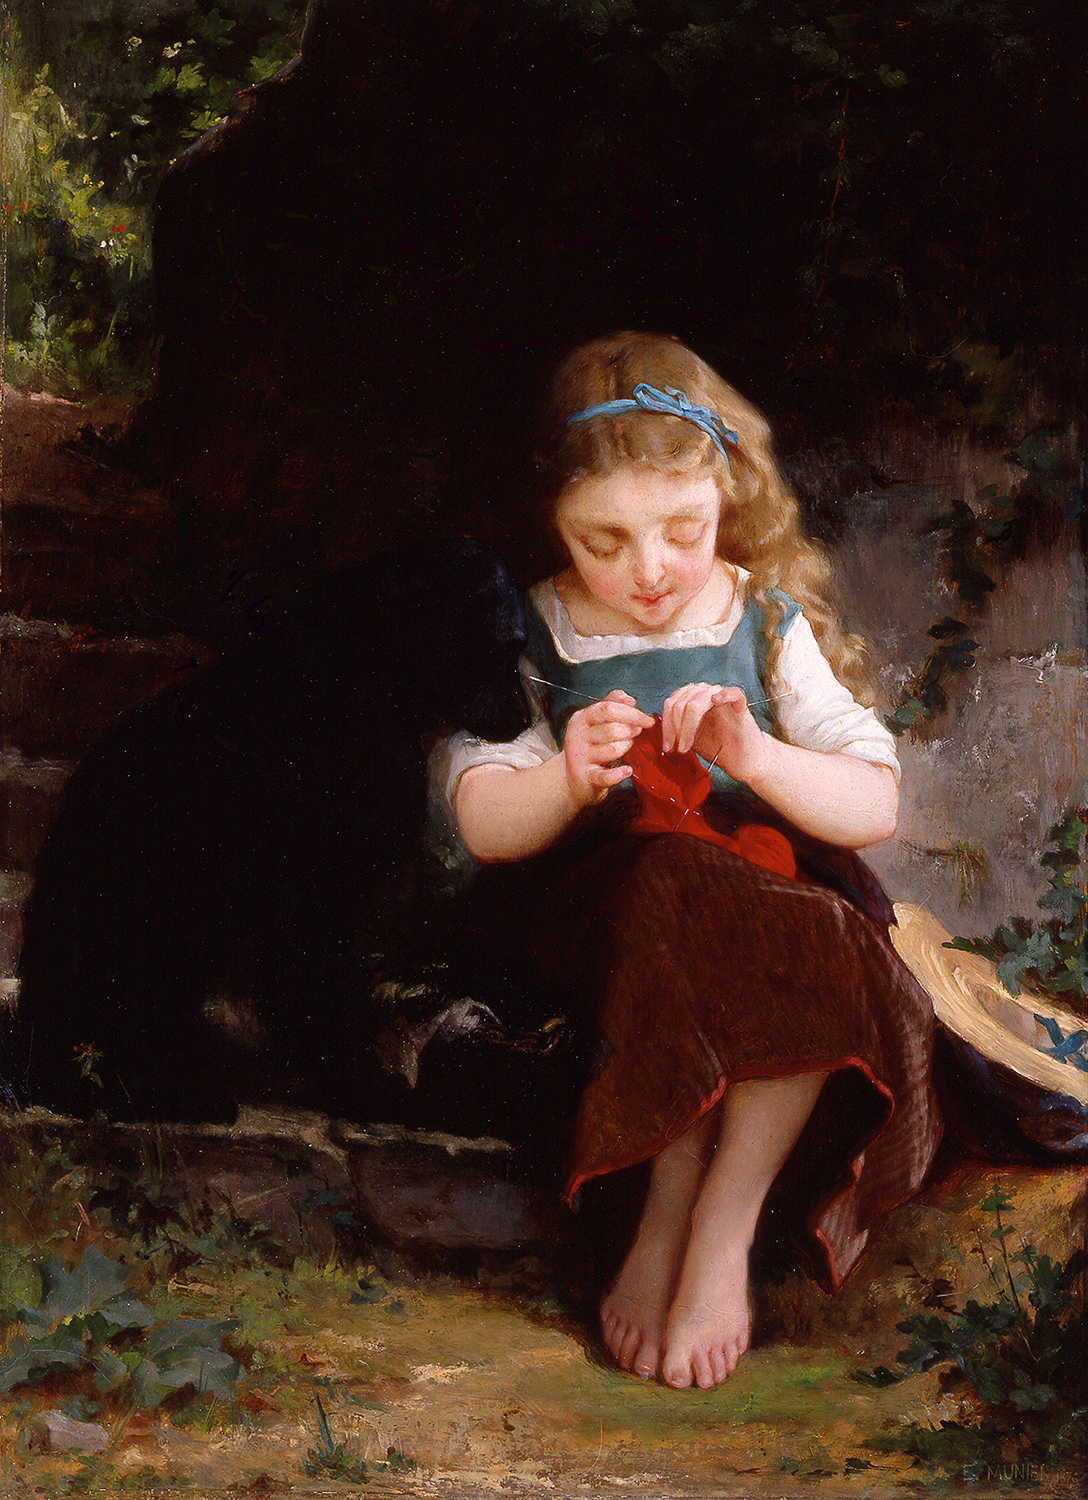 a young girl knitting with a dog by her side